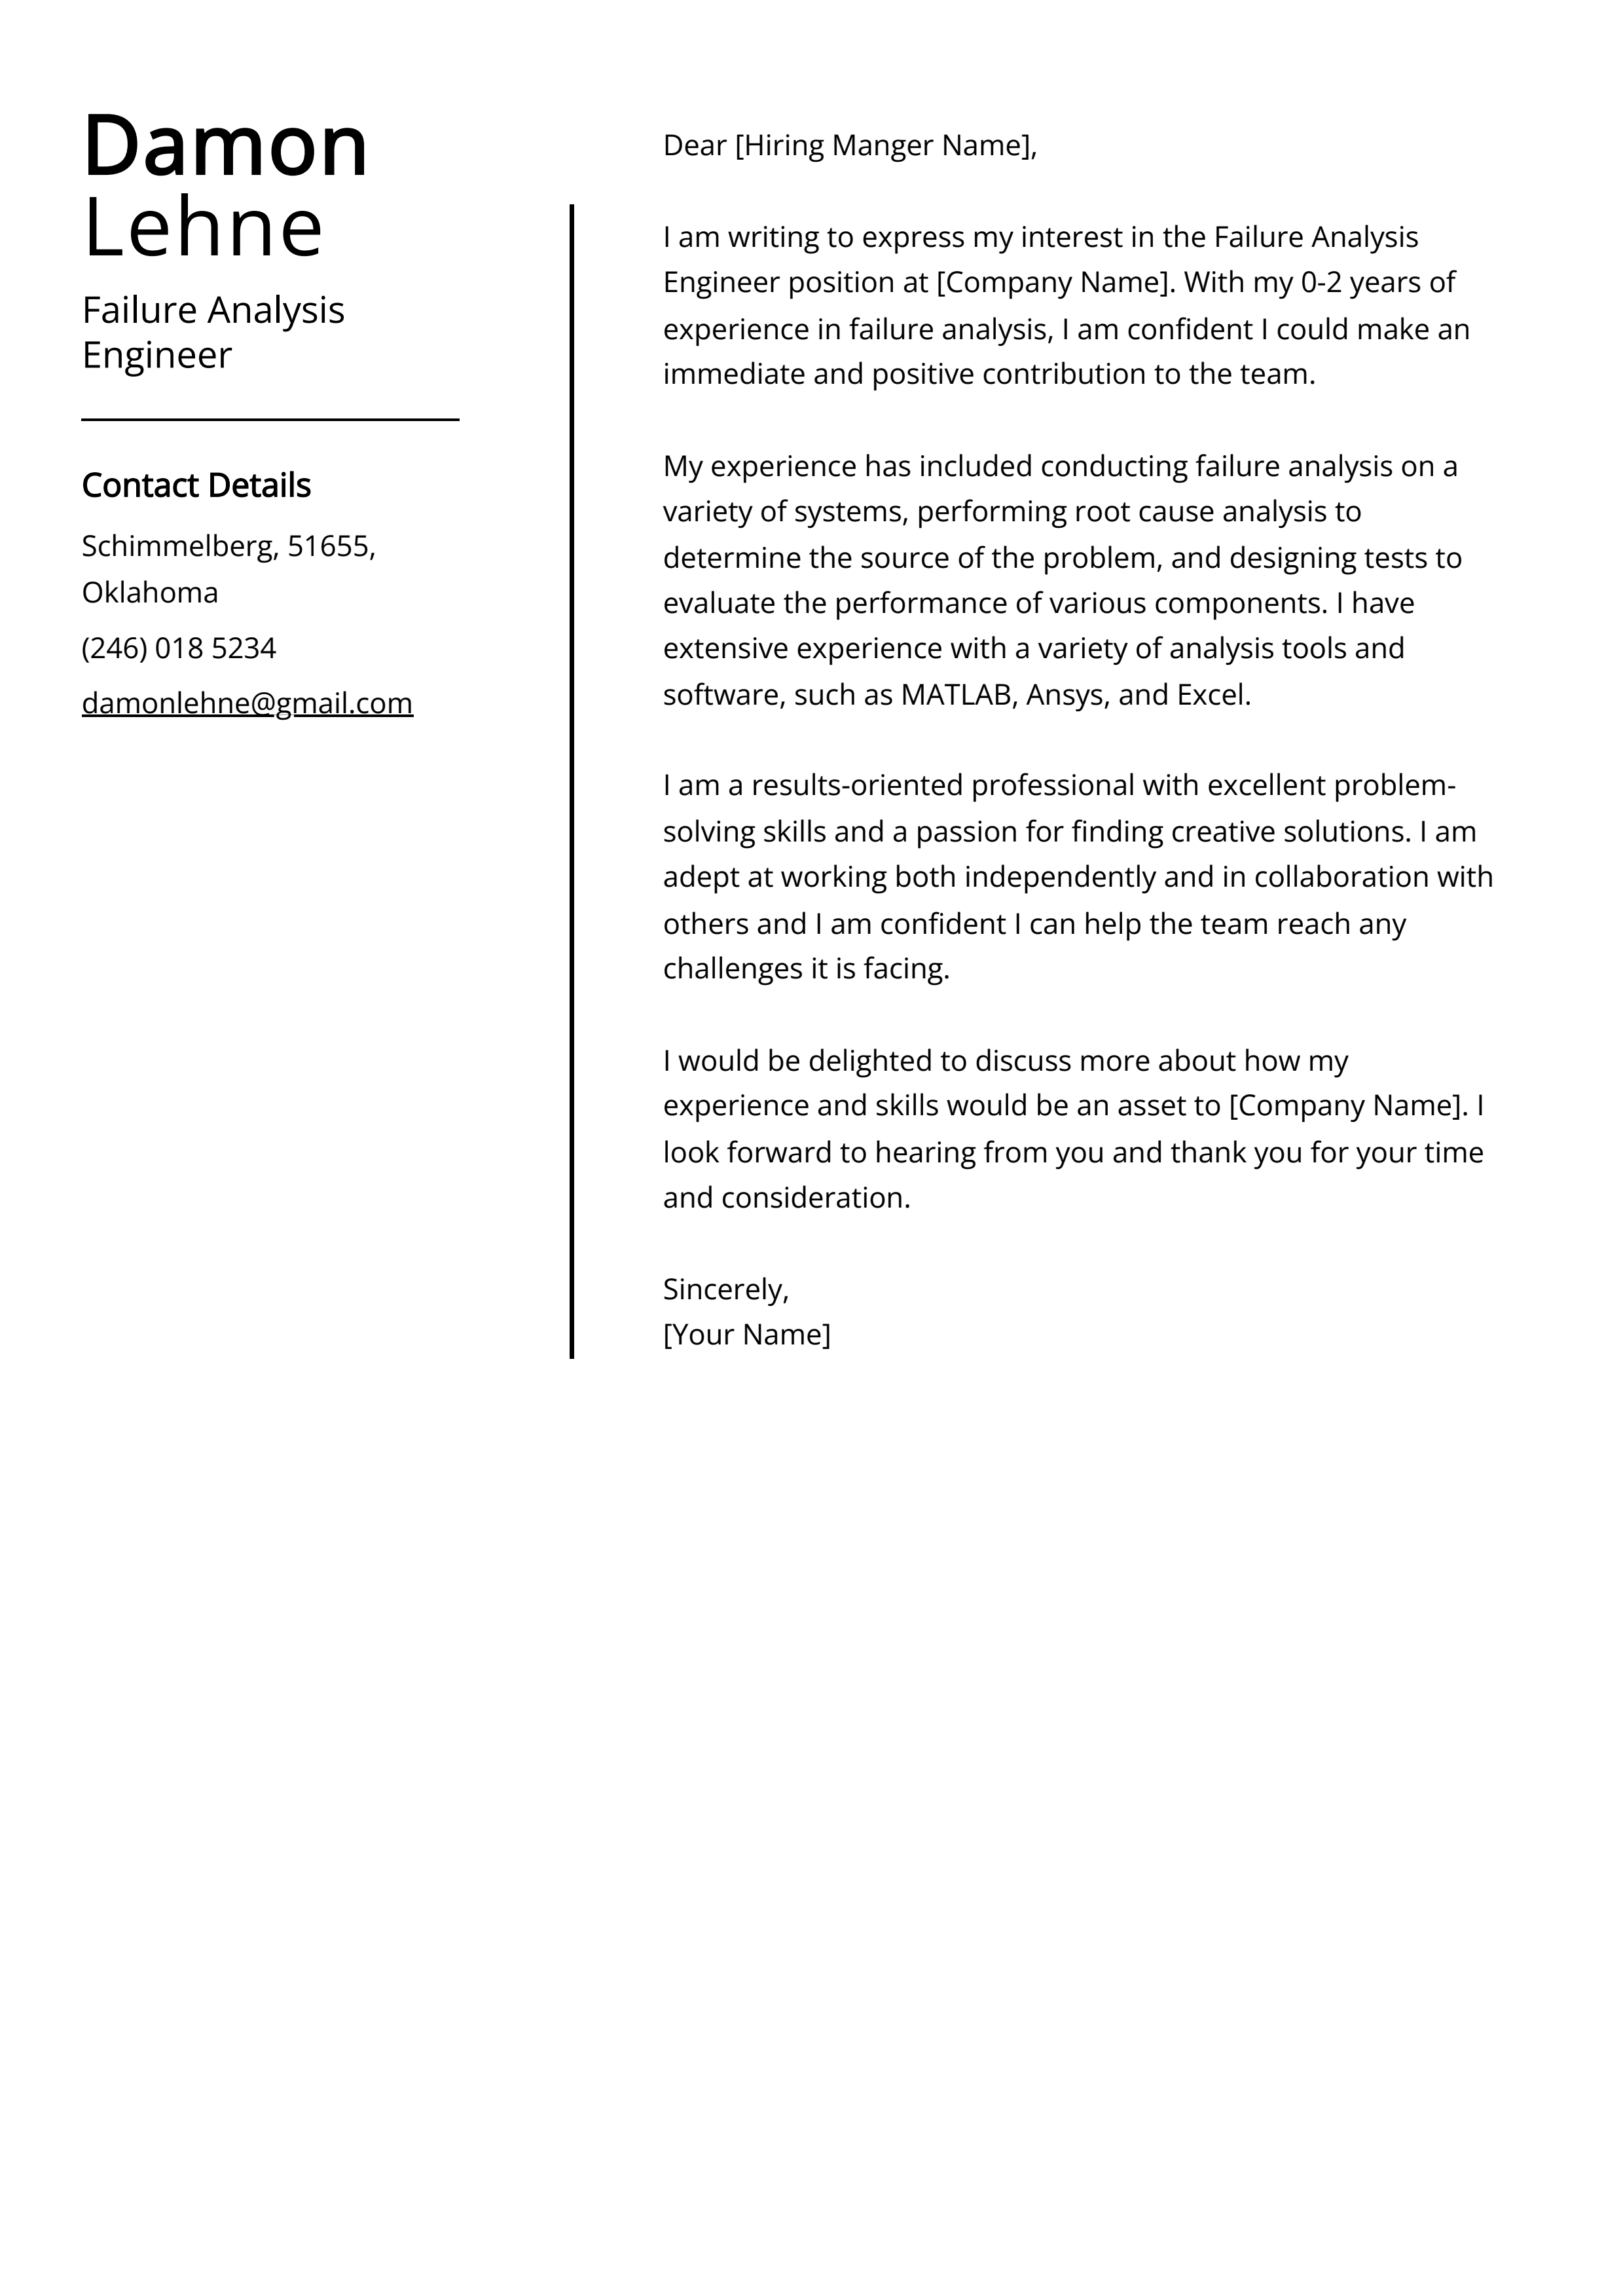 Failure Analysis Engineer Cover Letter Example